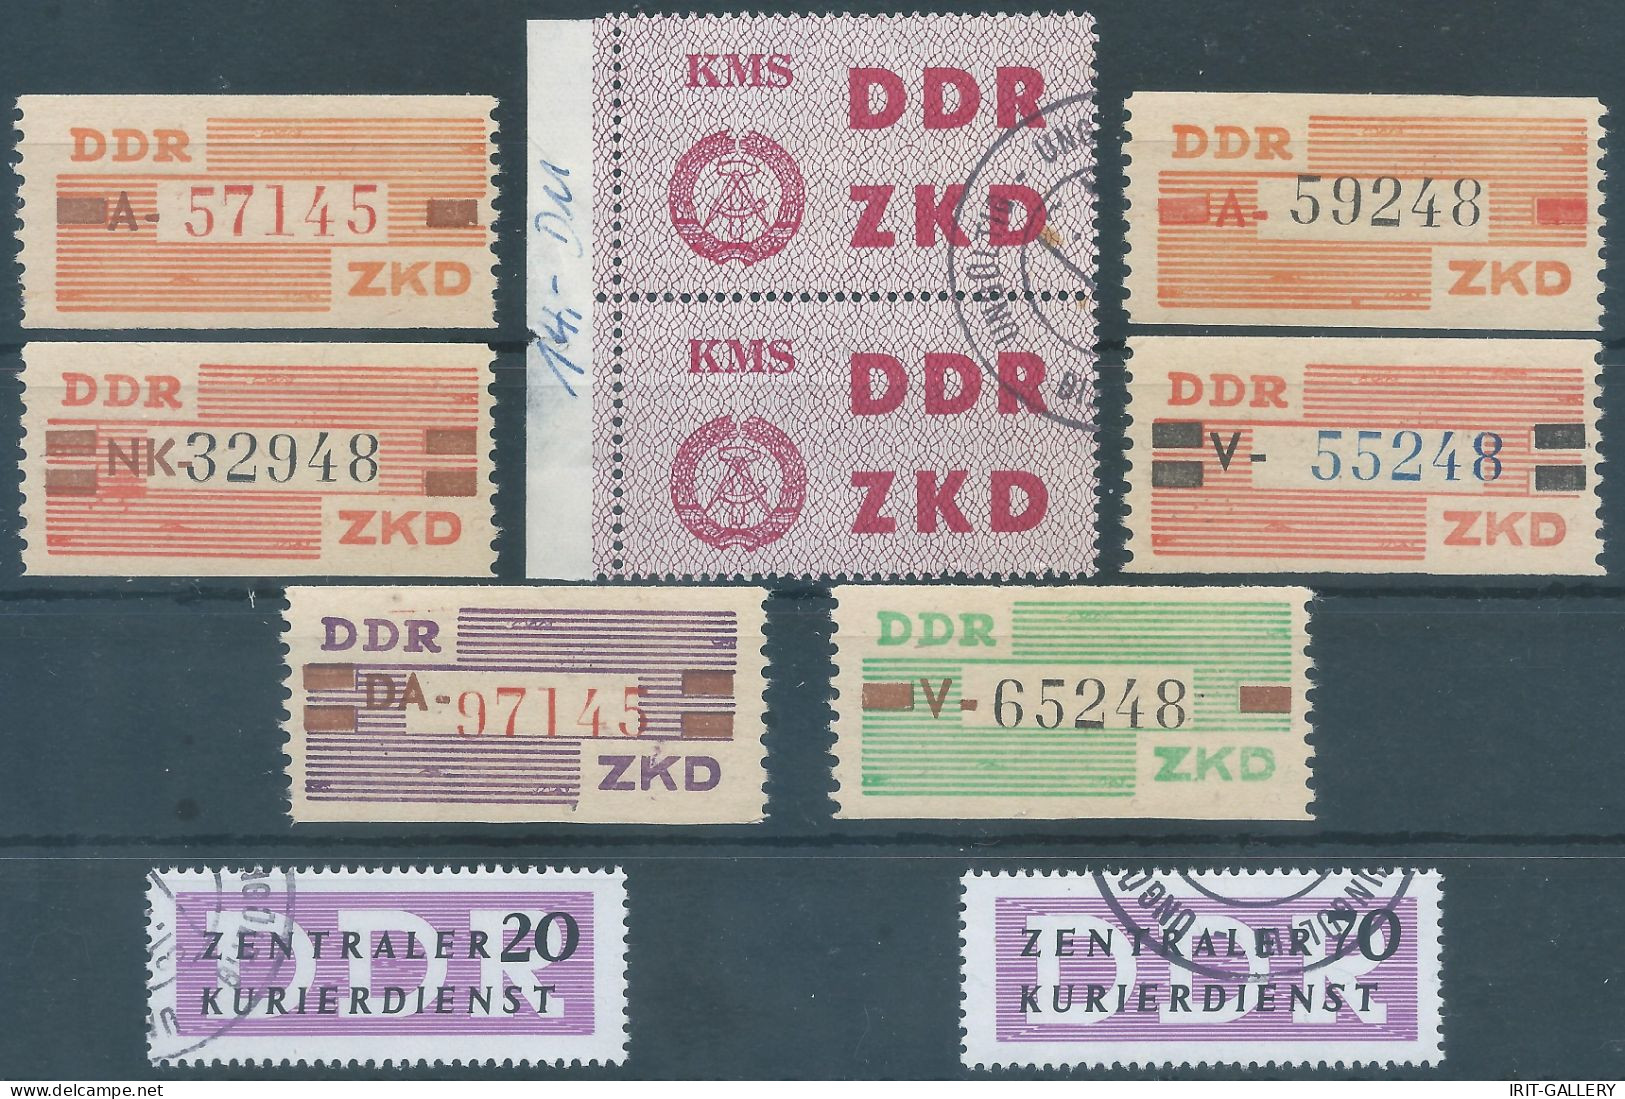 Germany-Deutschland,DDR - ZKD ,Revenue Stamps ,Services,Obliterated & Mint - Mint